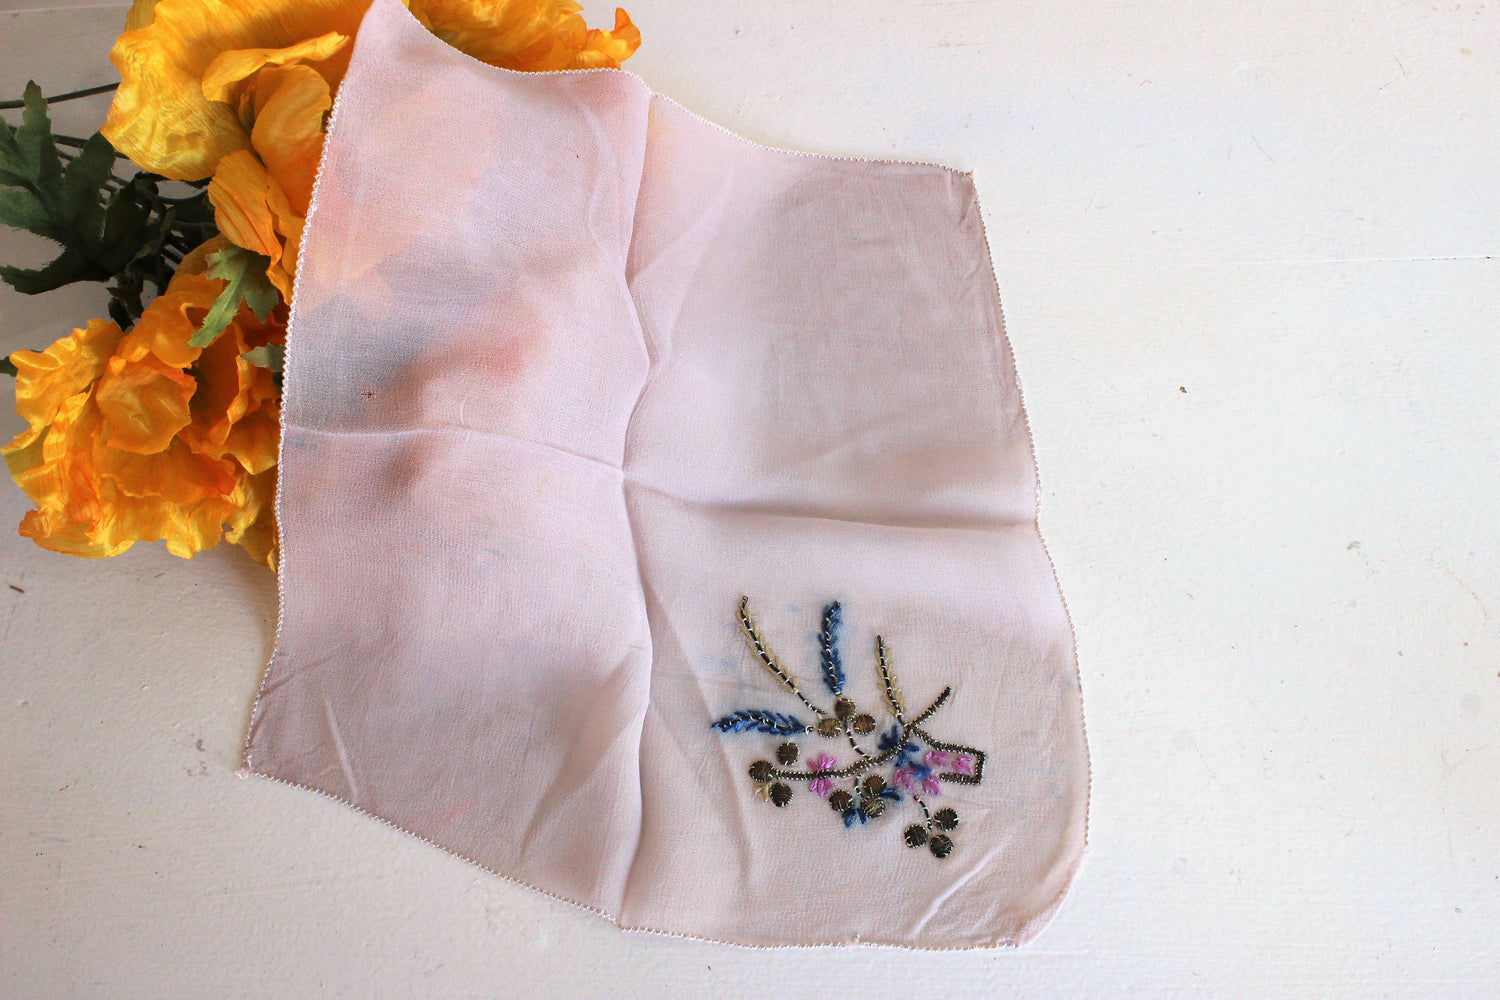 Vintage 1940s 1950s Handkerchief In Lavender Chiffon With Embroidered Flowers